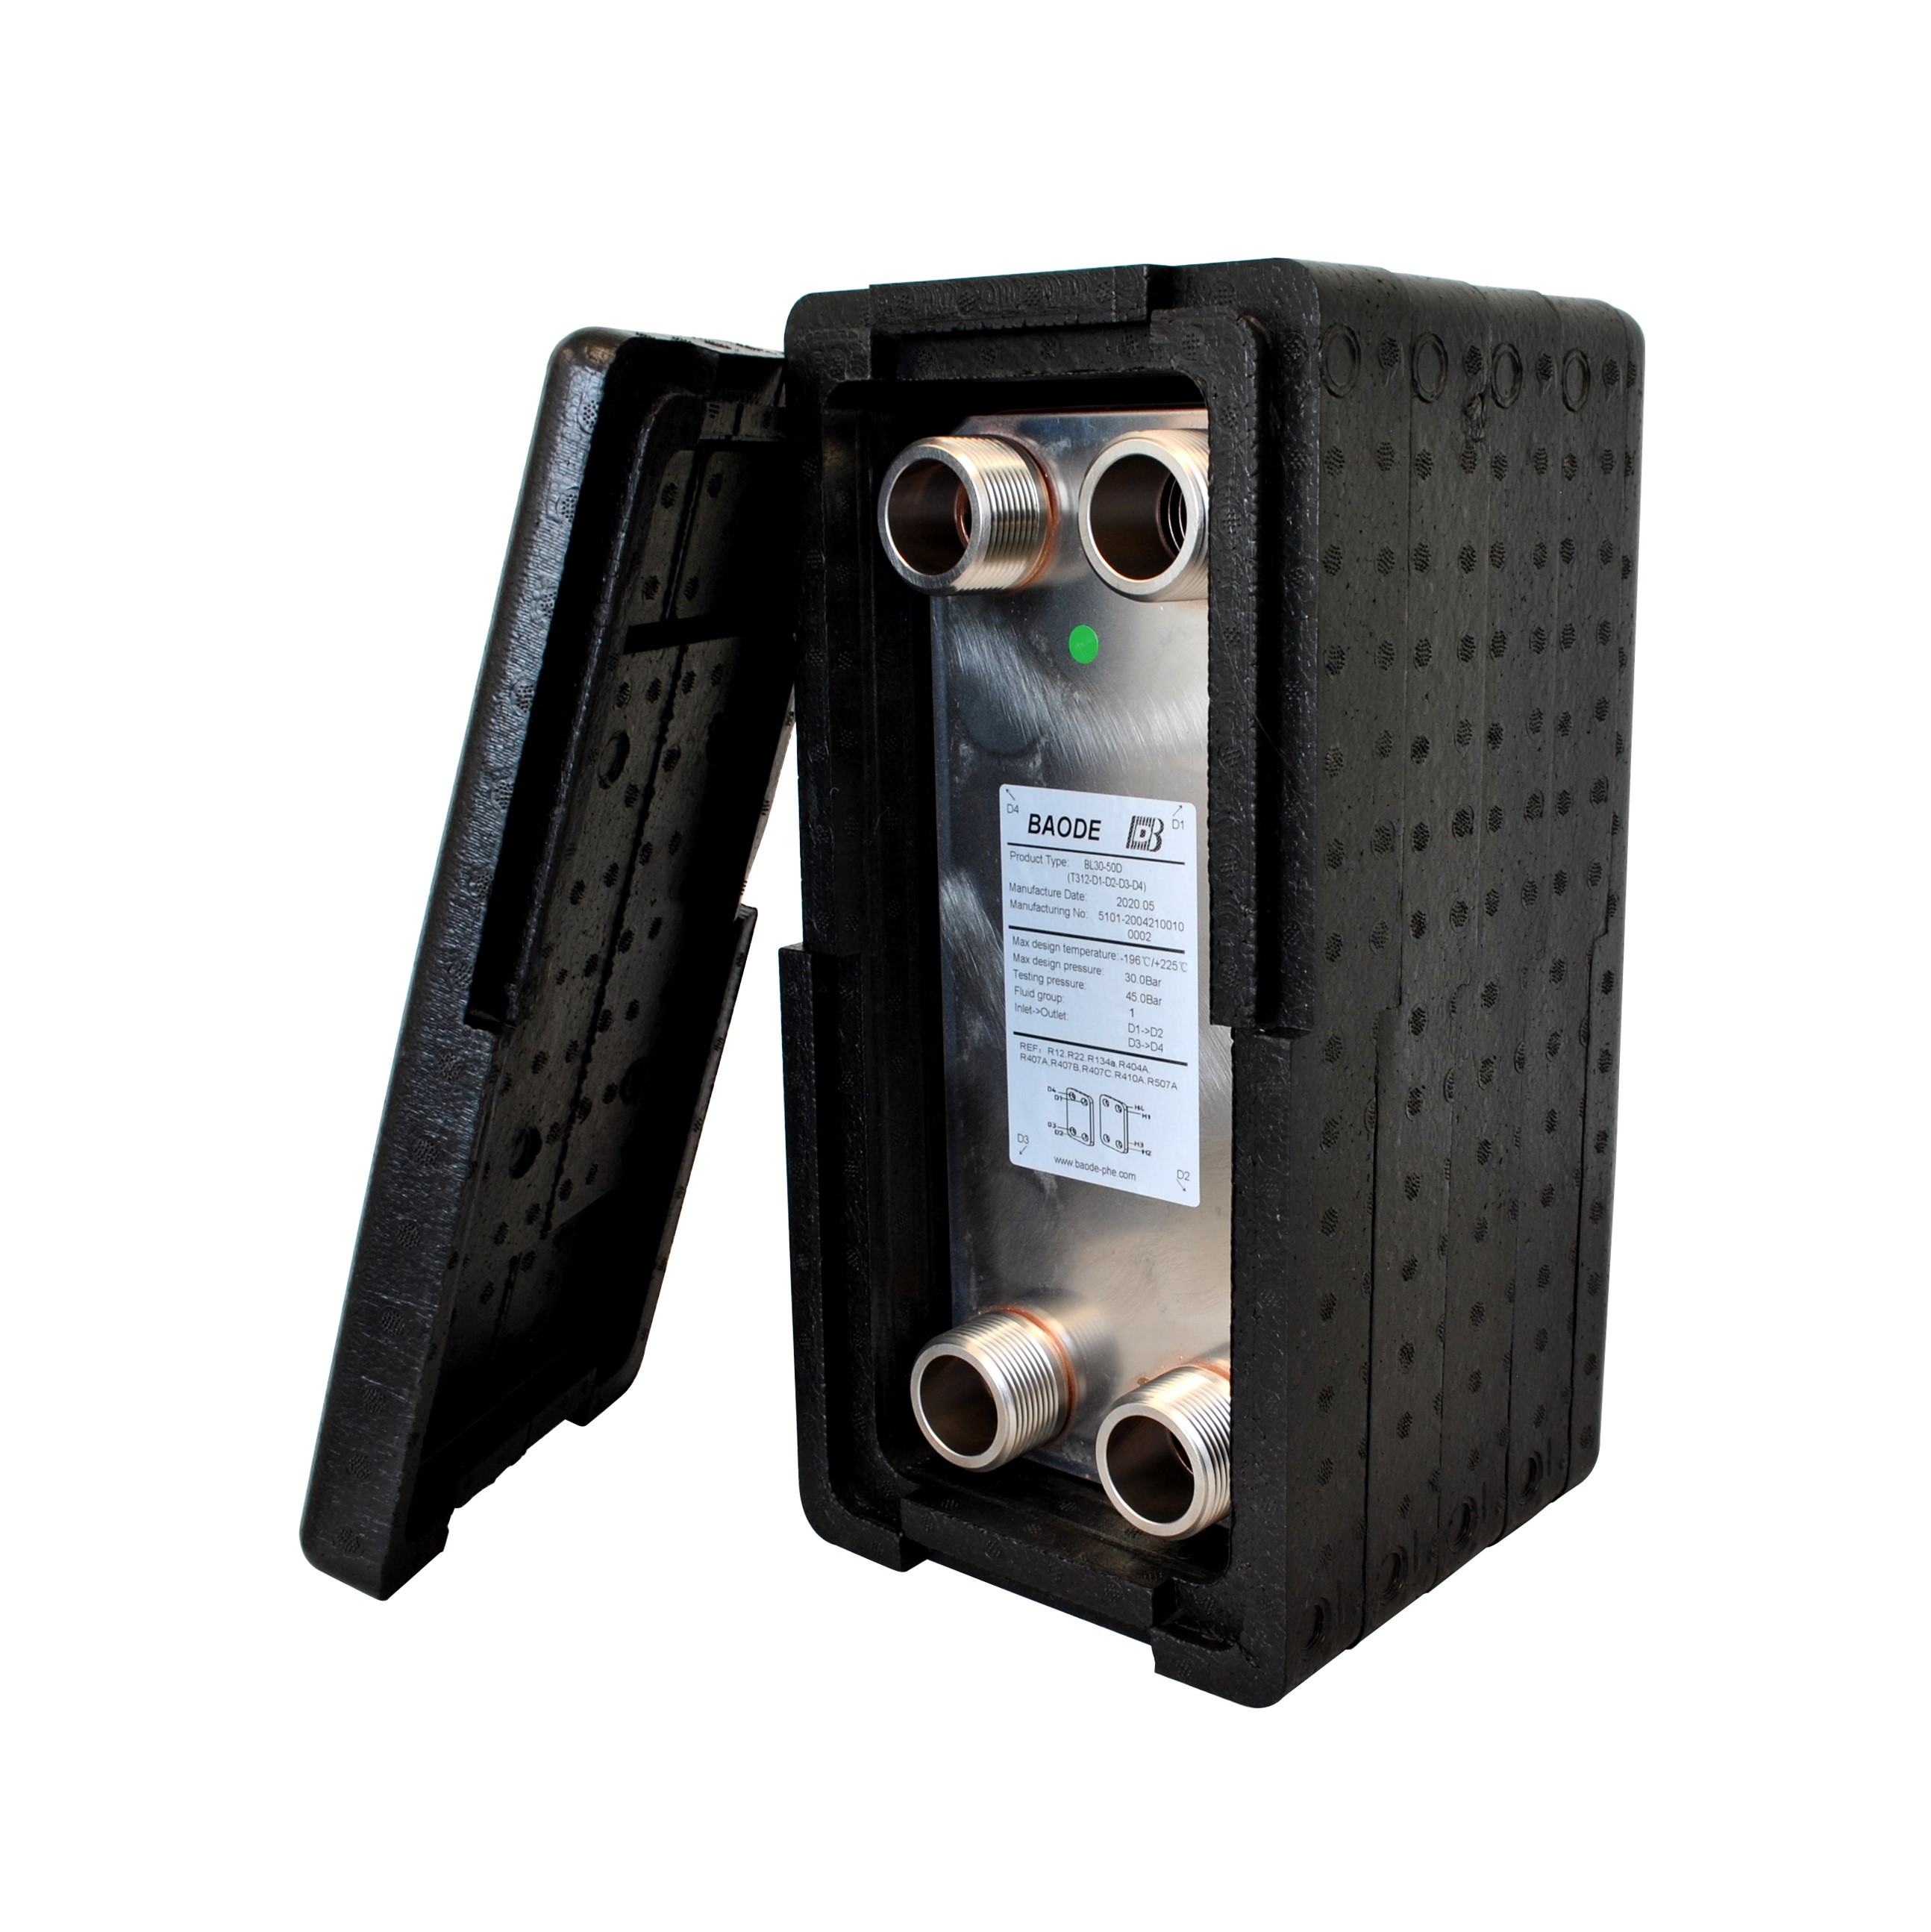 Baode BL26C Flat Plate Heat Exchanger - 50 Plate With Insulation Kit - 1.25"